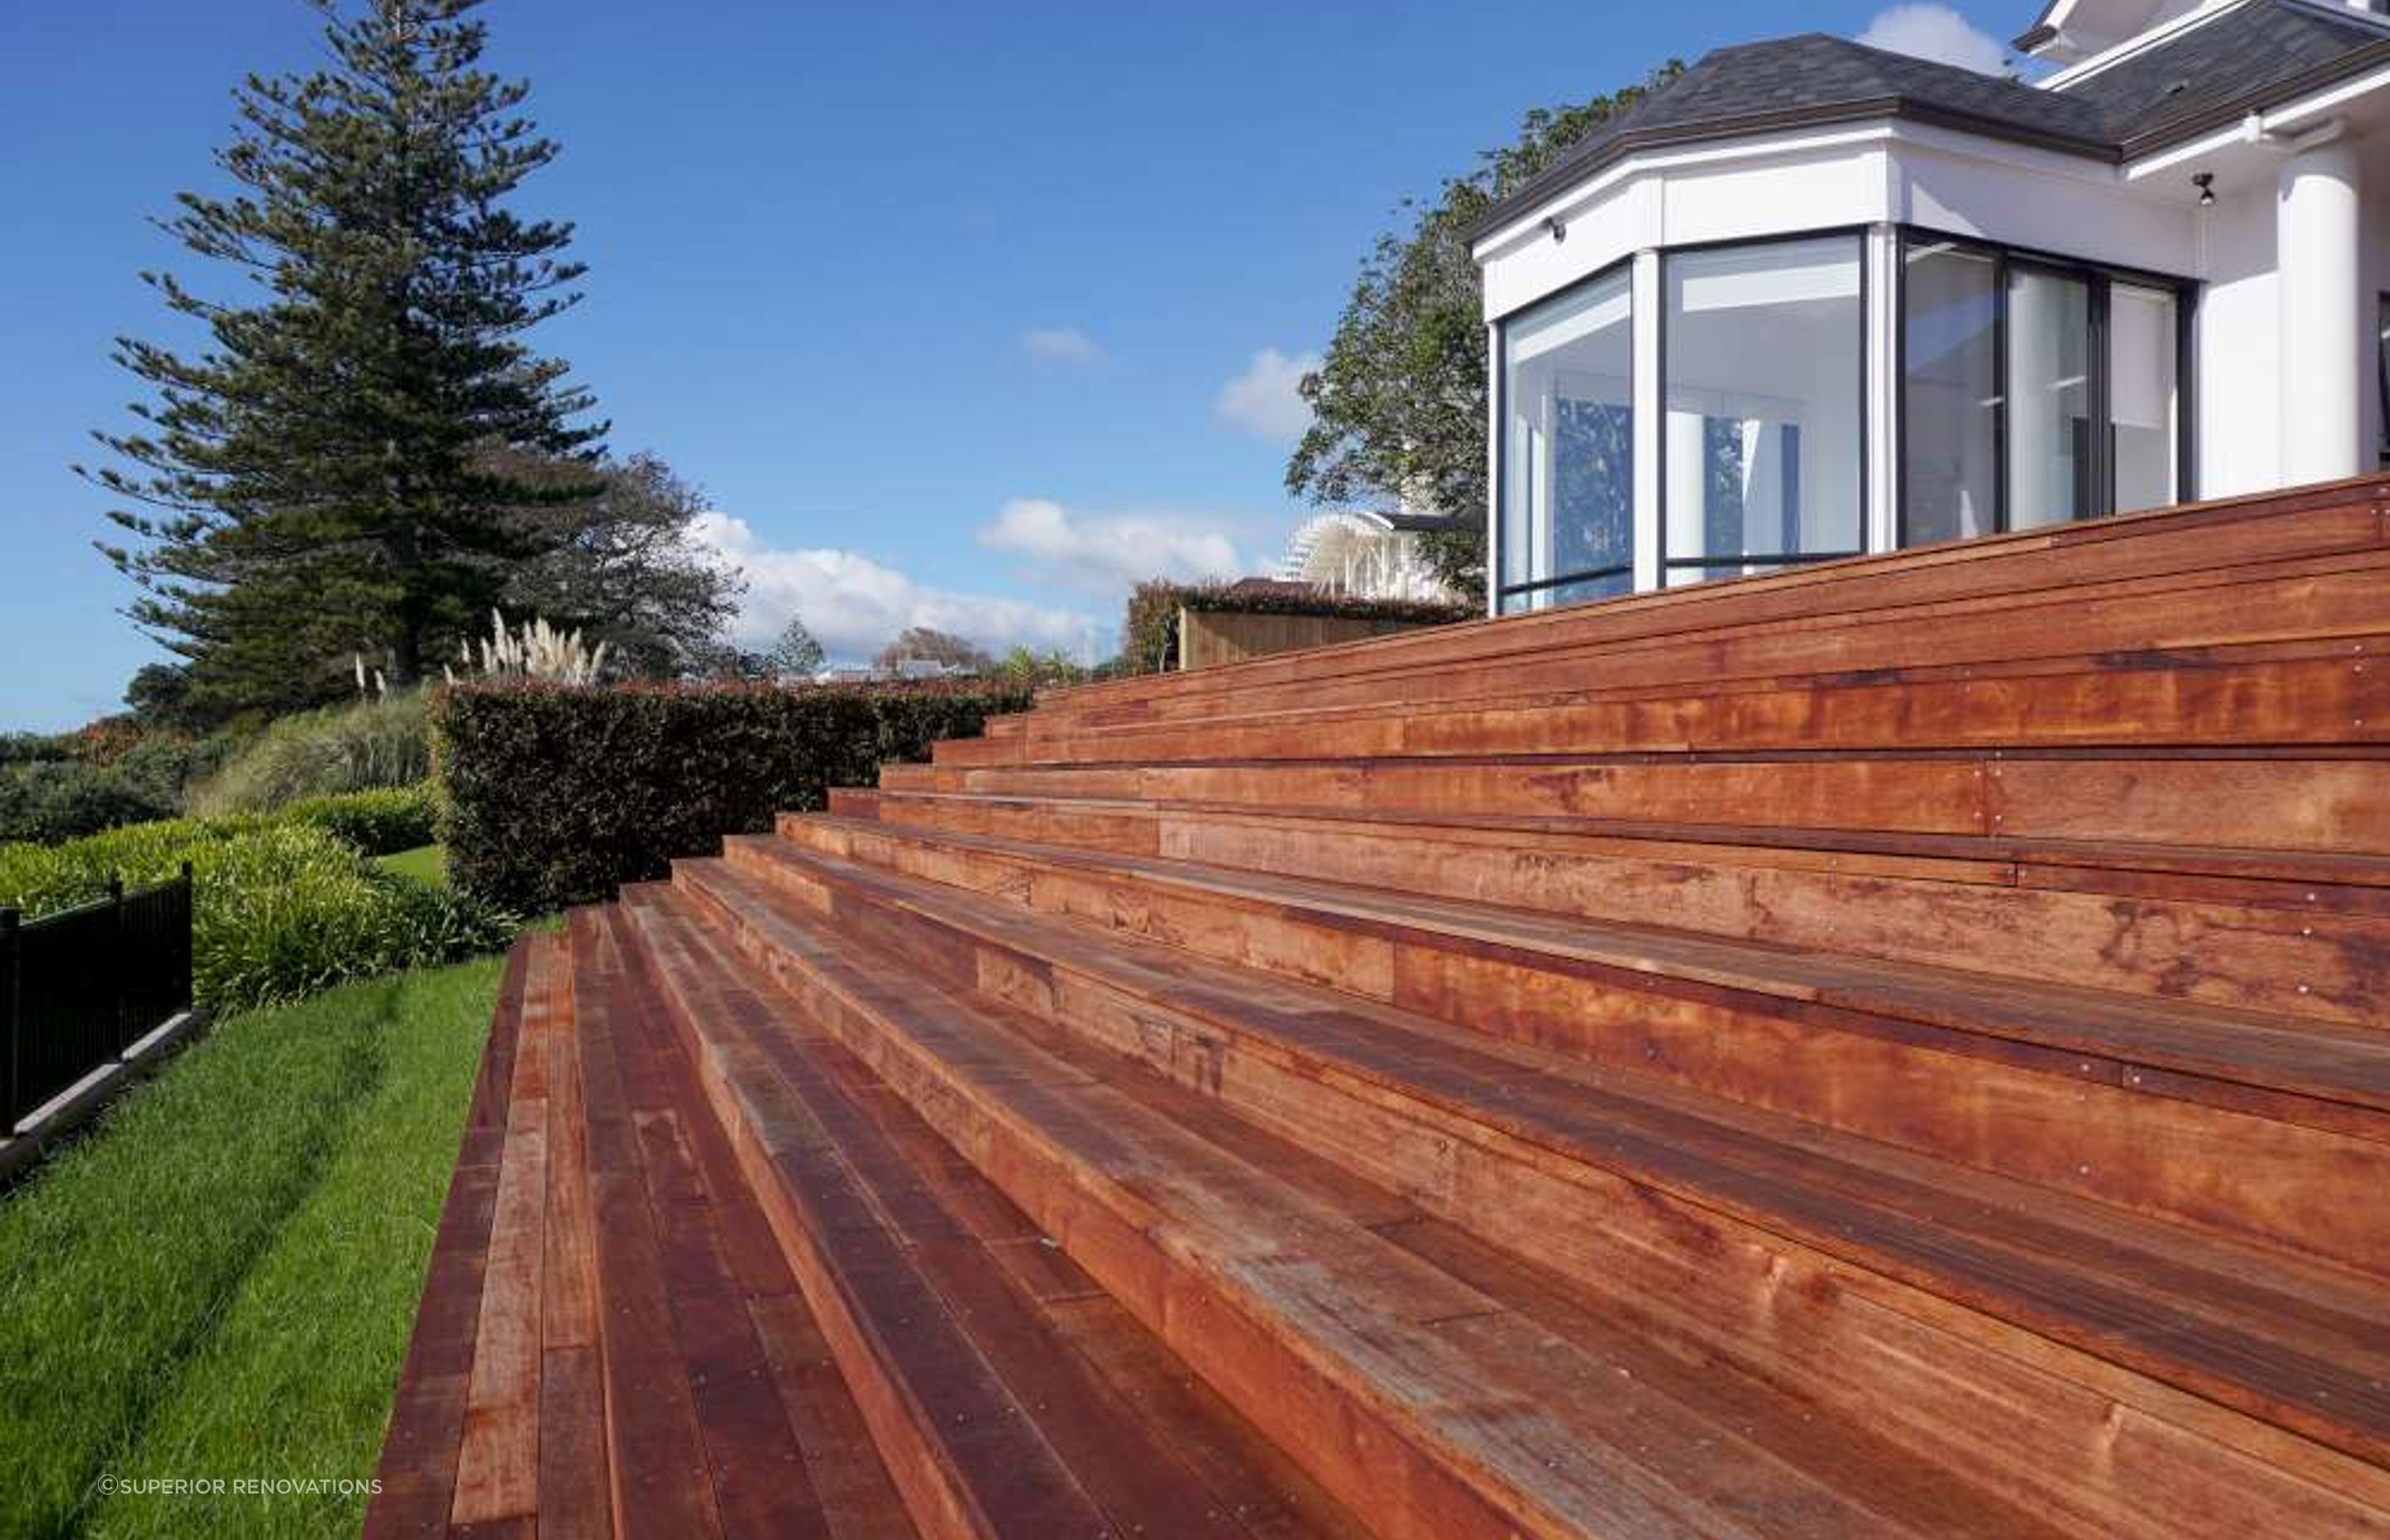 This landscaping project involved creating a large Kwila Deck around the house with the front section going down in stairs leading to a small lawn area that was fenced with aluminium fencing providing spectacular views of the Mellon’s Bay in Auckland